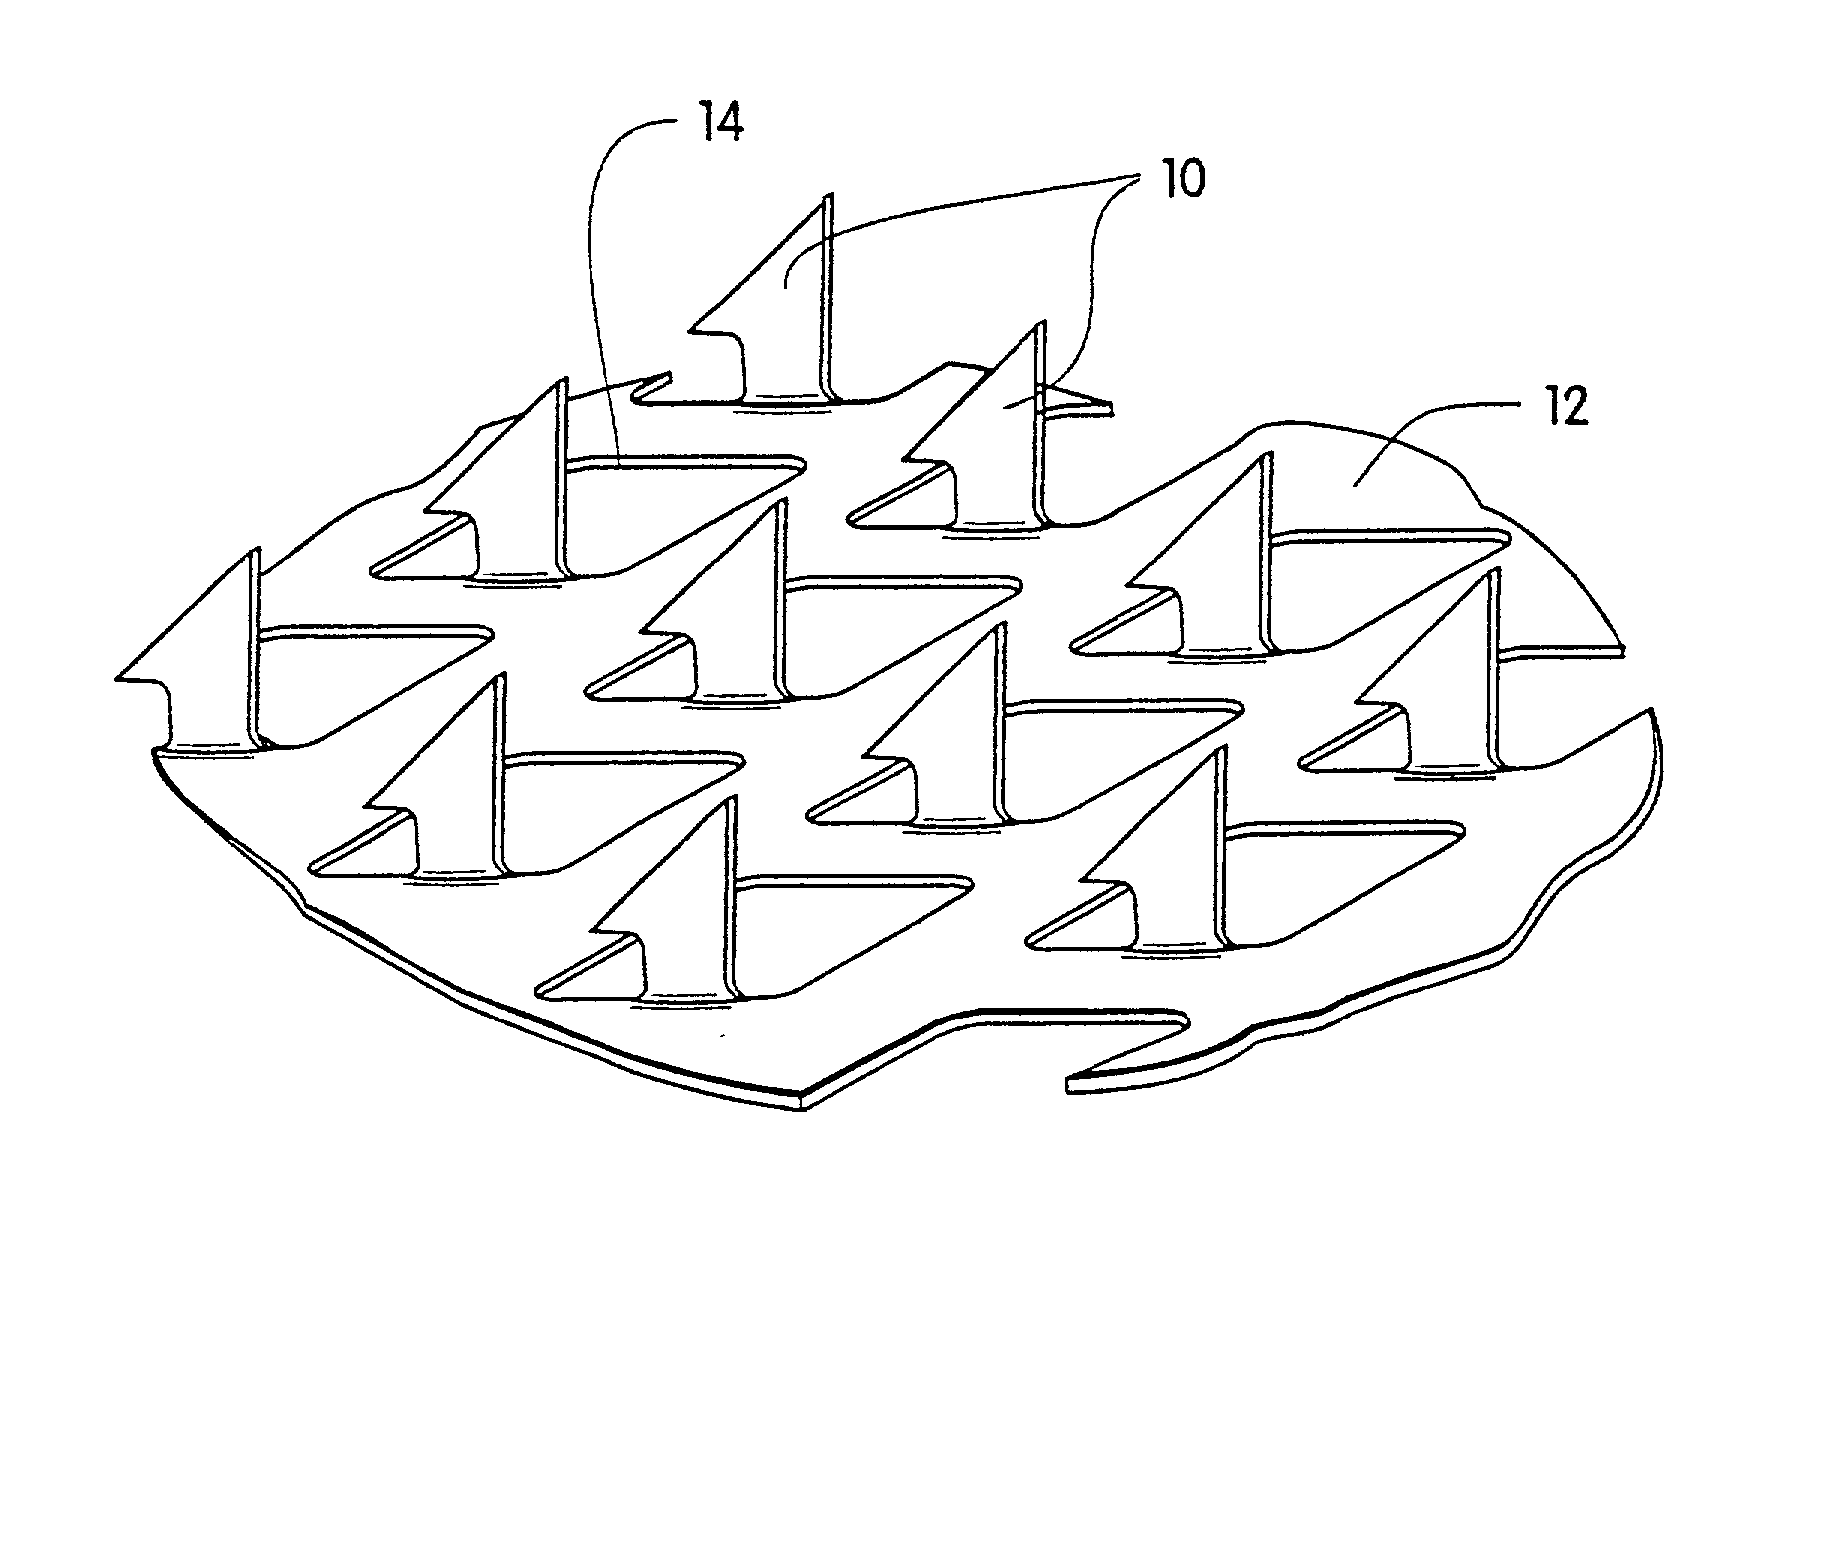 Transdermal drug delivery devices having coated microprotrusions